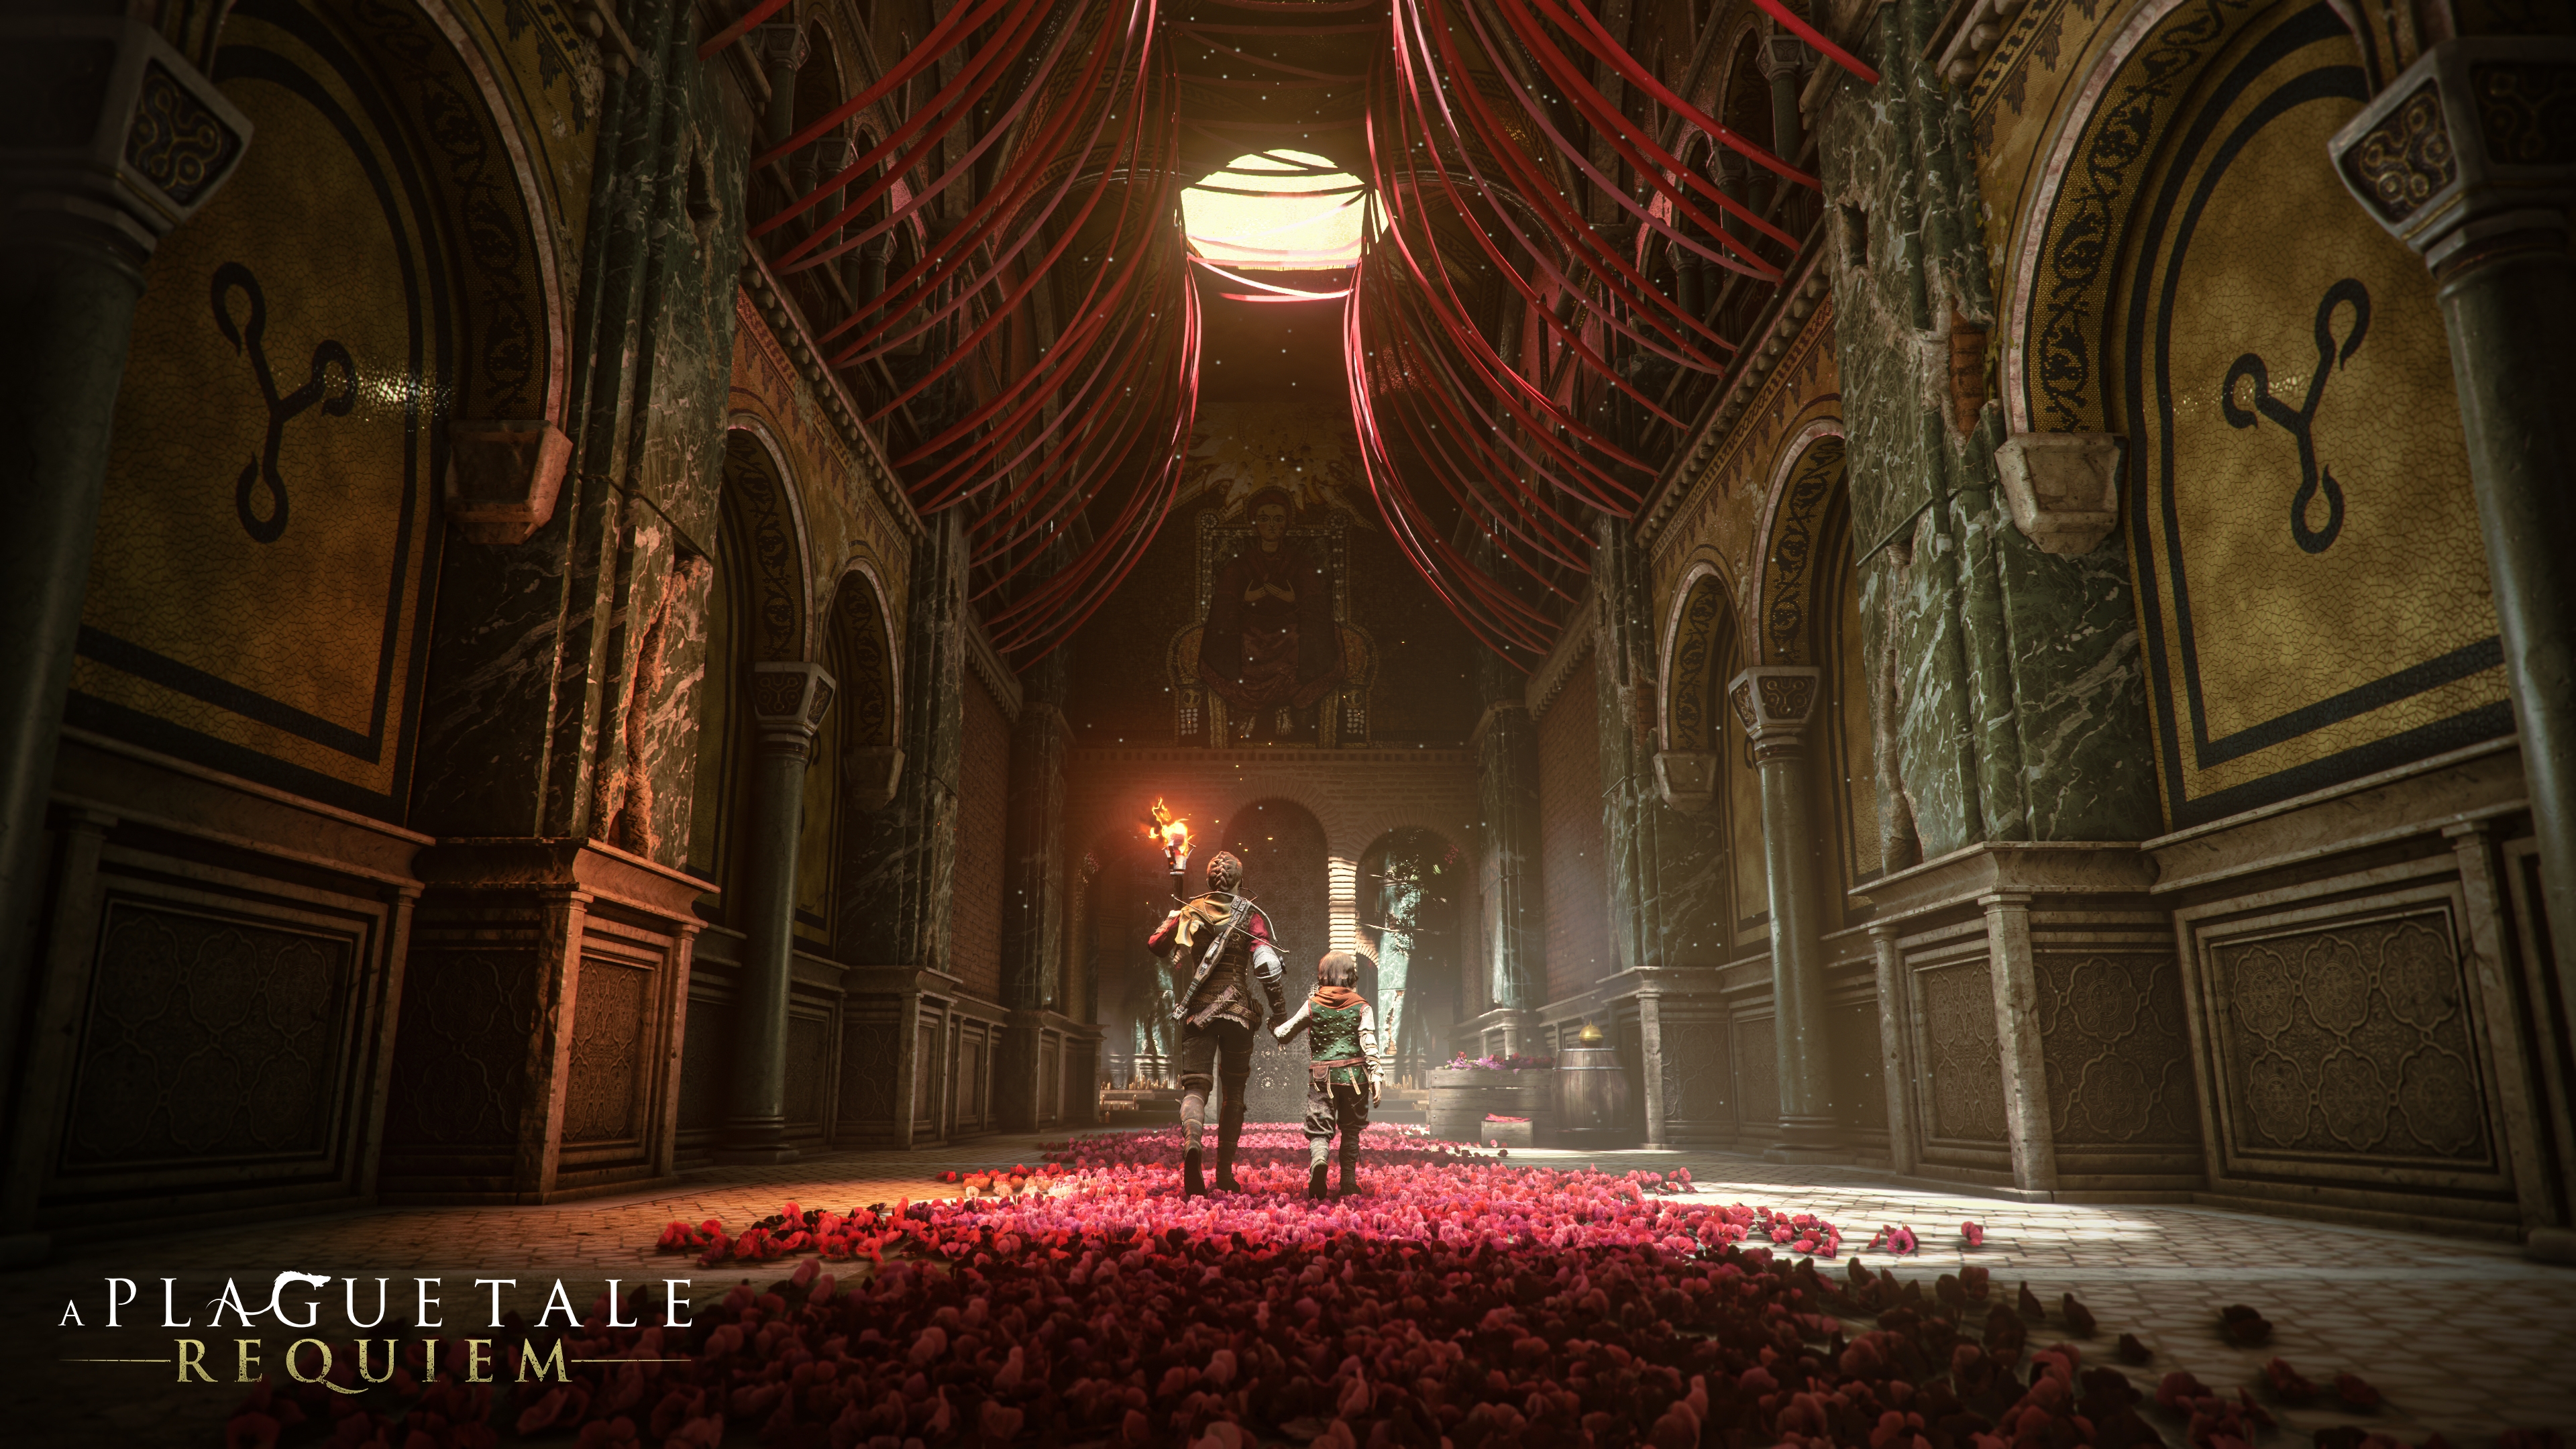 A Plague Tale - Surprise! 🎶 After composing the OST of A Plague Tale:  Innocence (and making us fall in love with it), we're thrilled to be  working again with Olivier Derivière